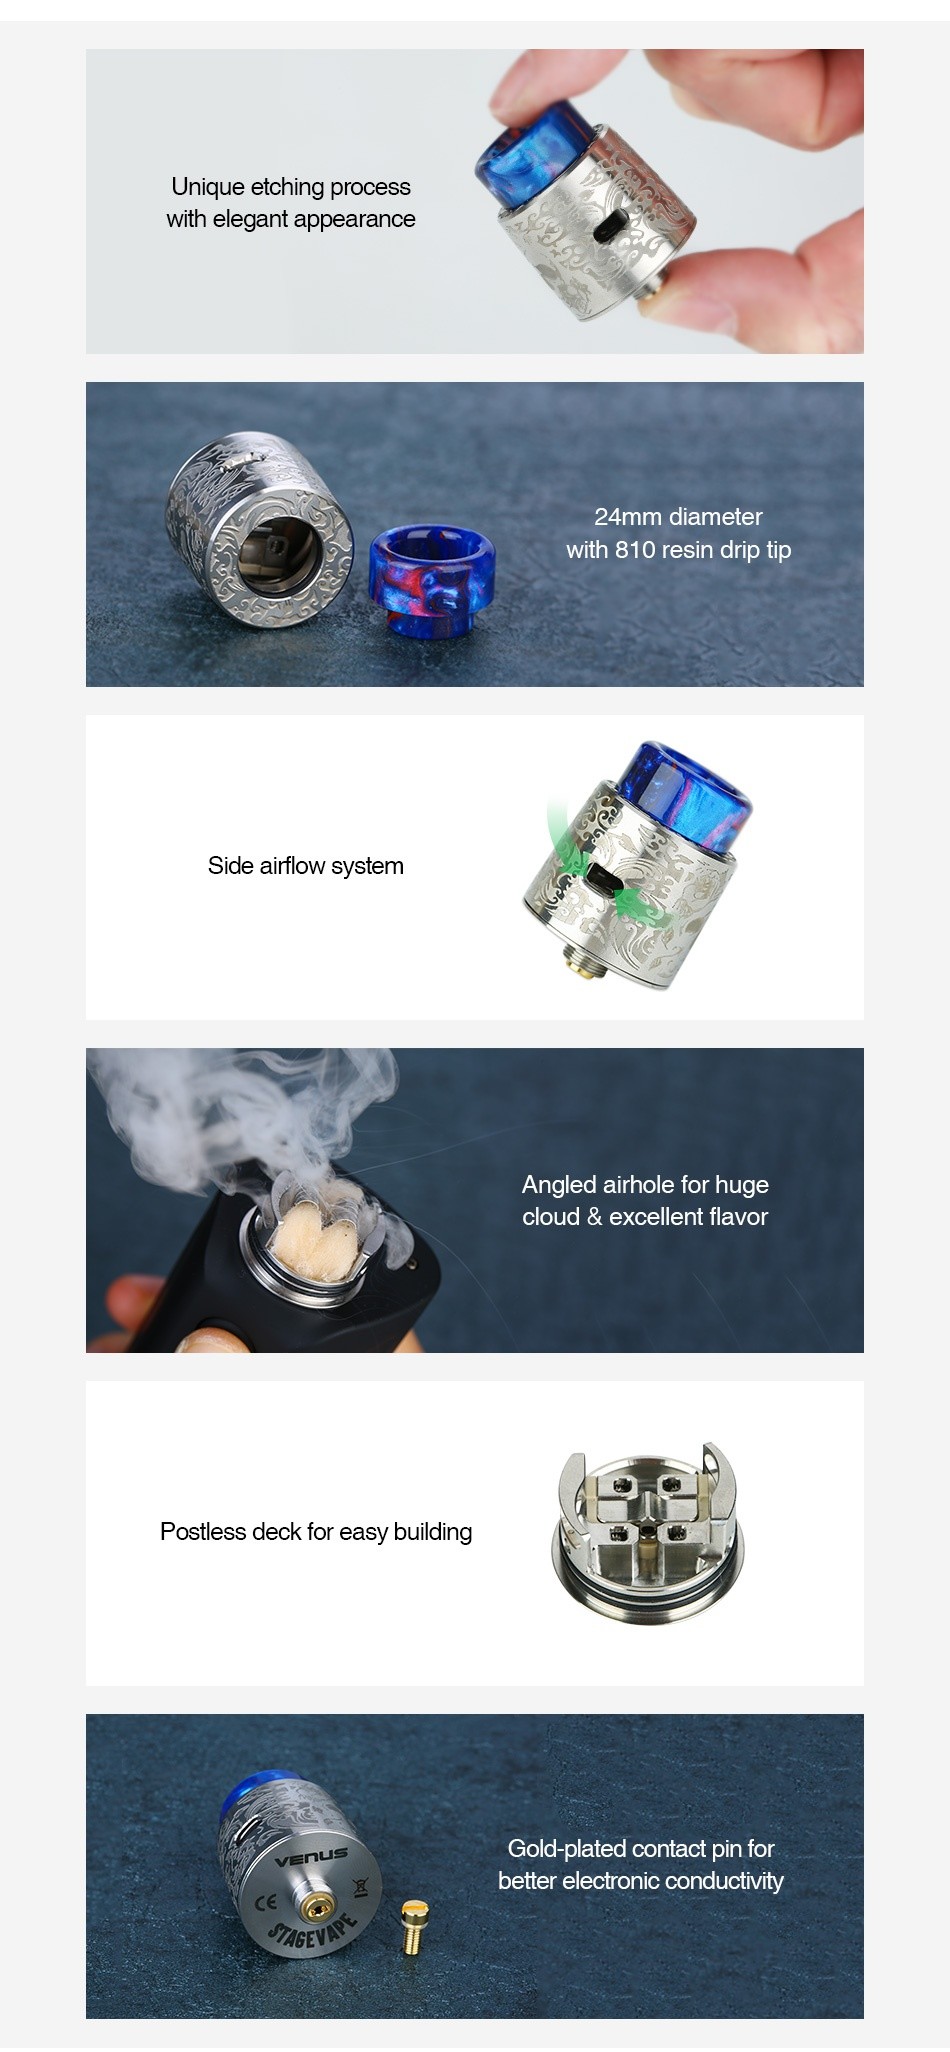 StageVape Venus RDA Unique etching process with elegant appearance 24mm diameter with 810 resin drip tip Side airflow system Angled airhole for huge cloud excellent flavor Postless deck for easy building Gold plated contact pin for better electronic conductivity